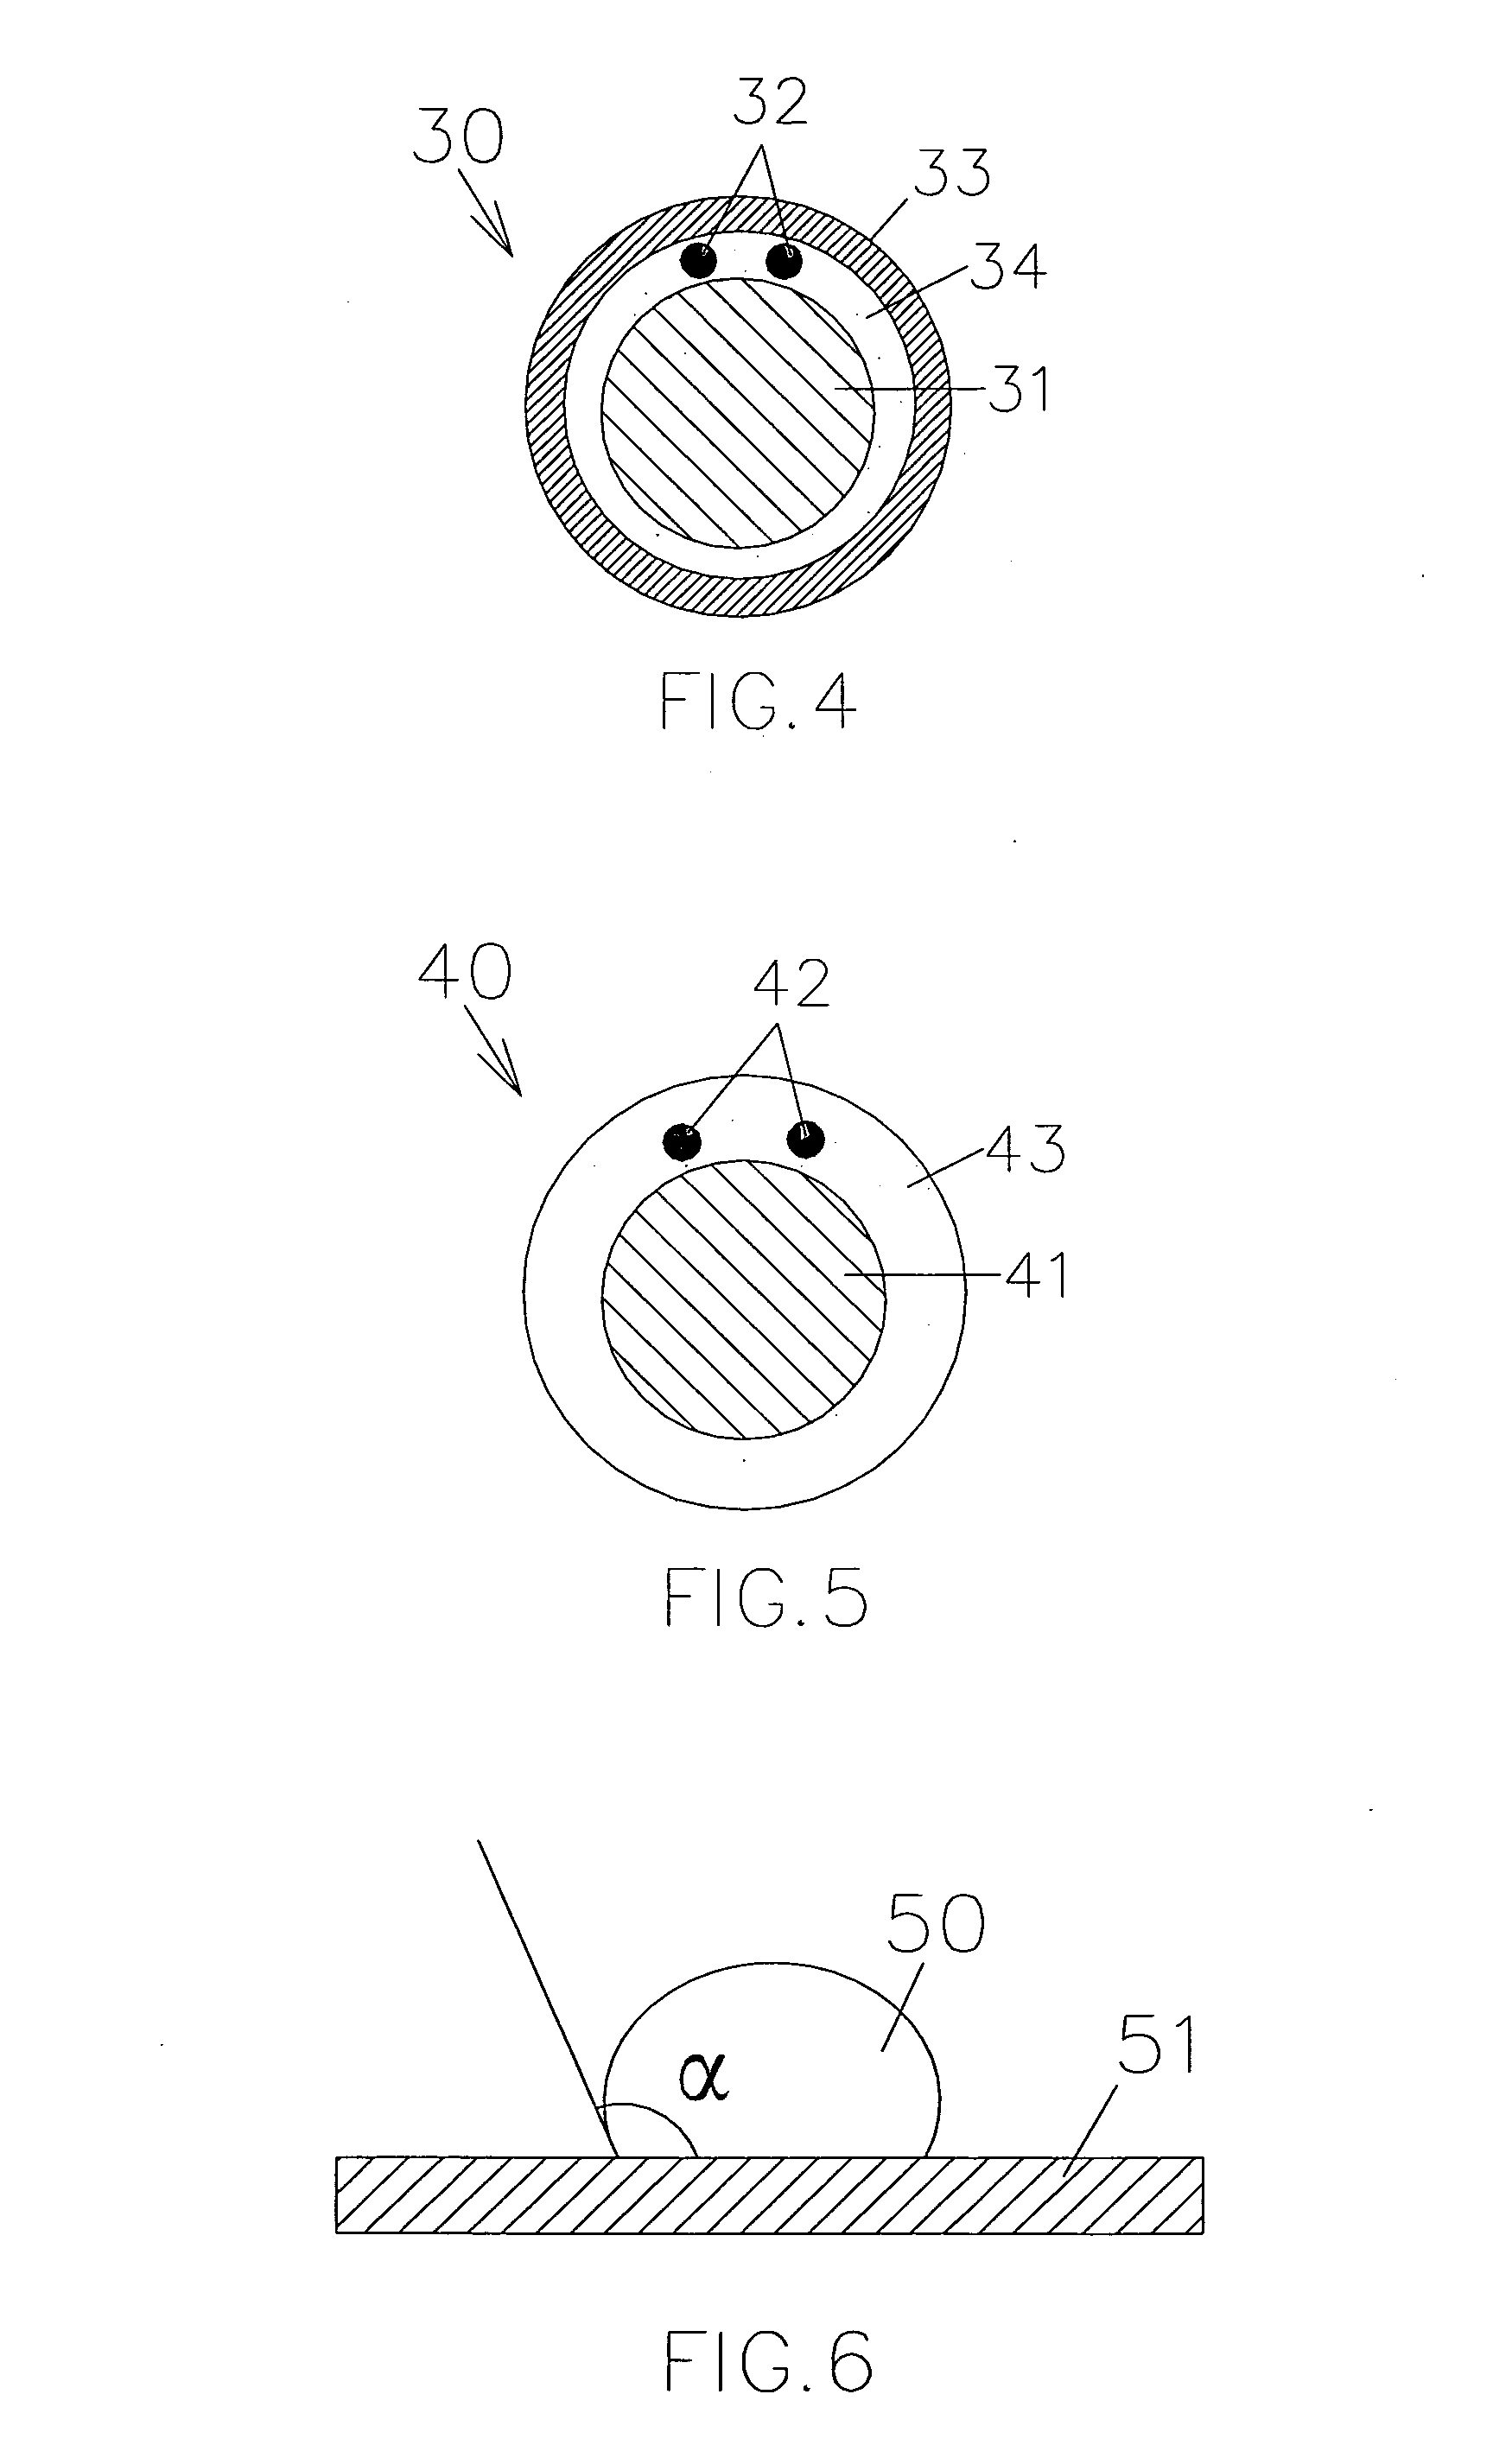 Electrical connector for medical device